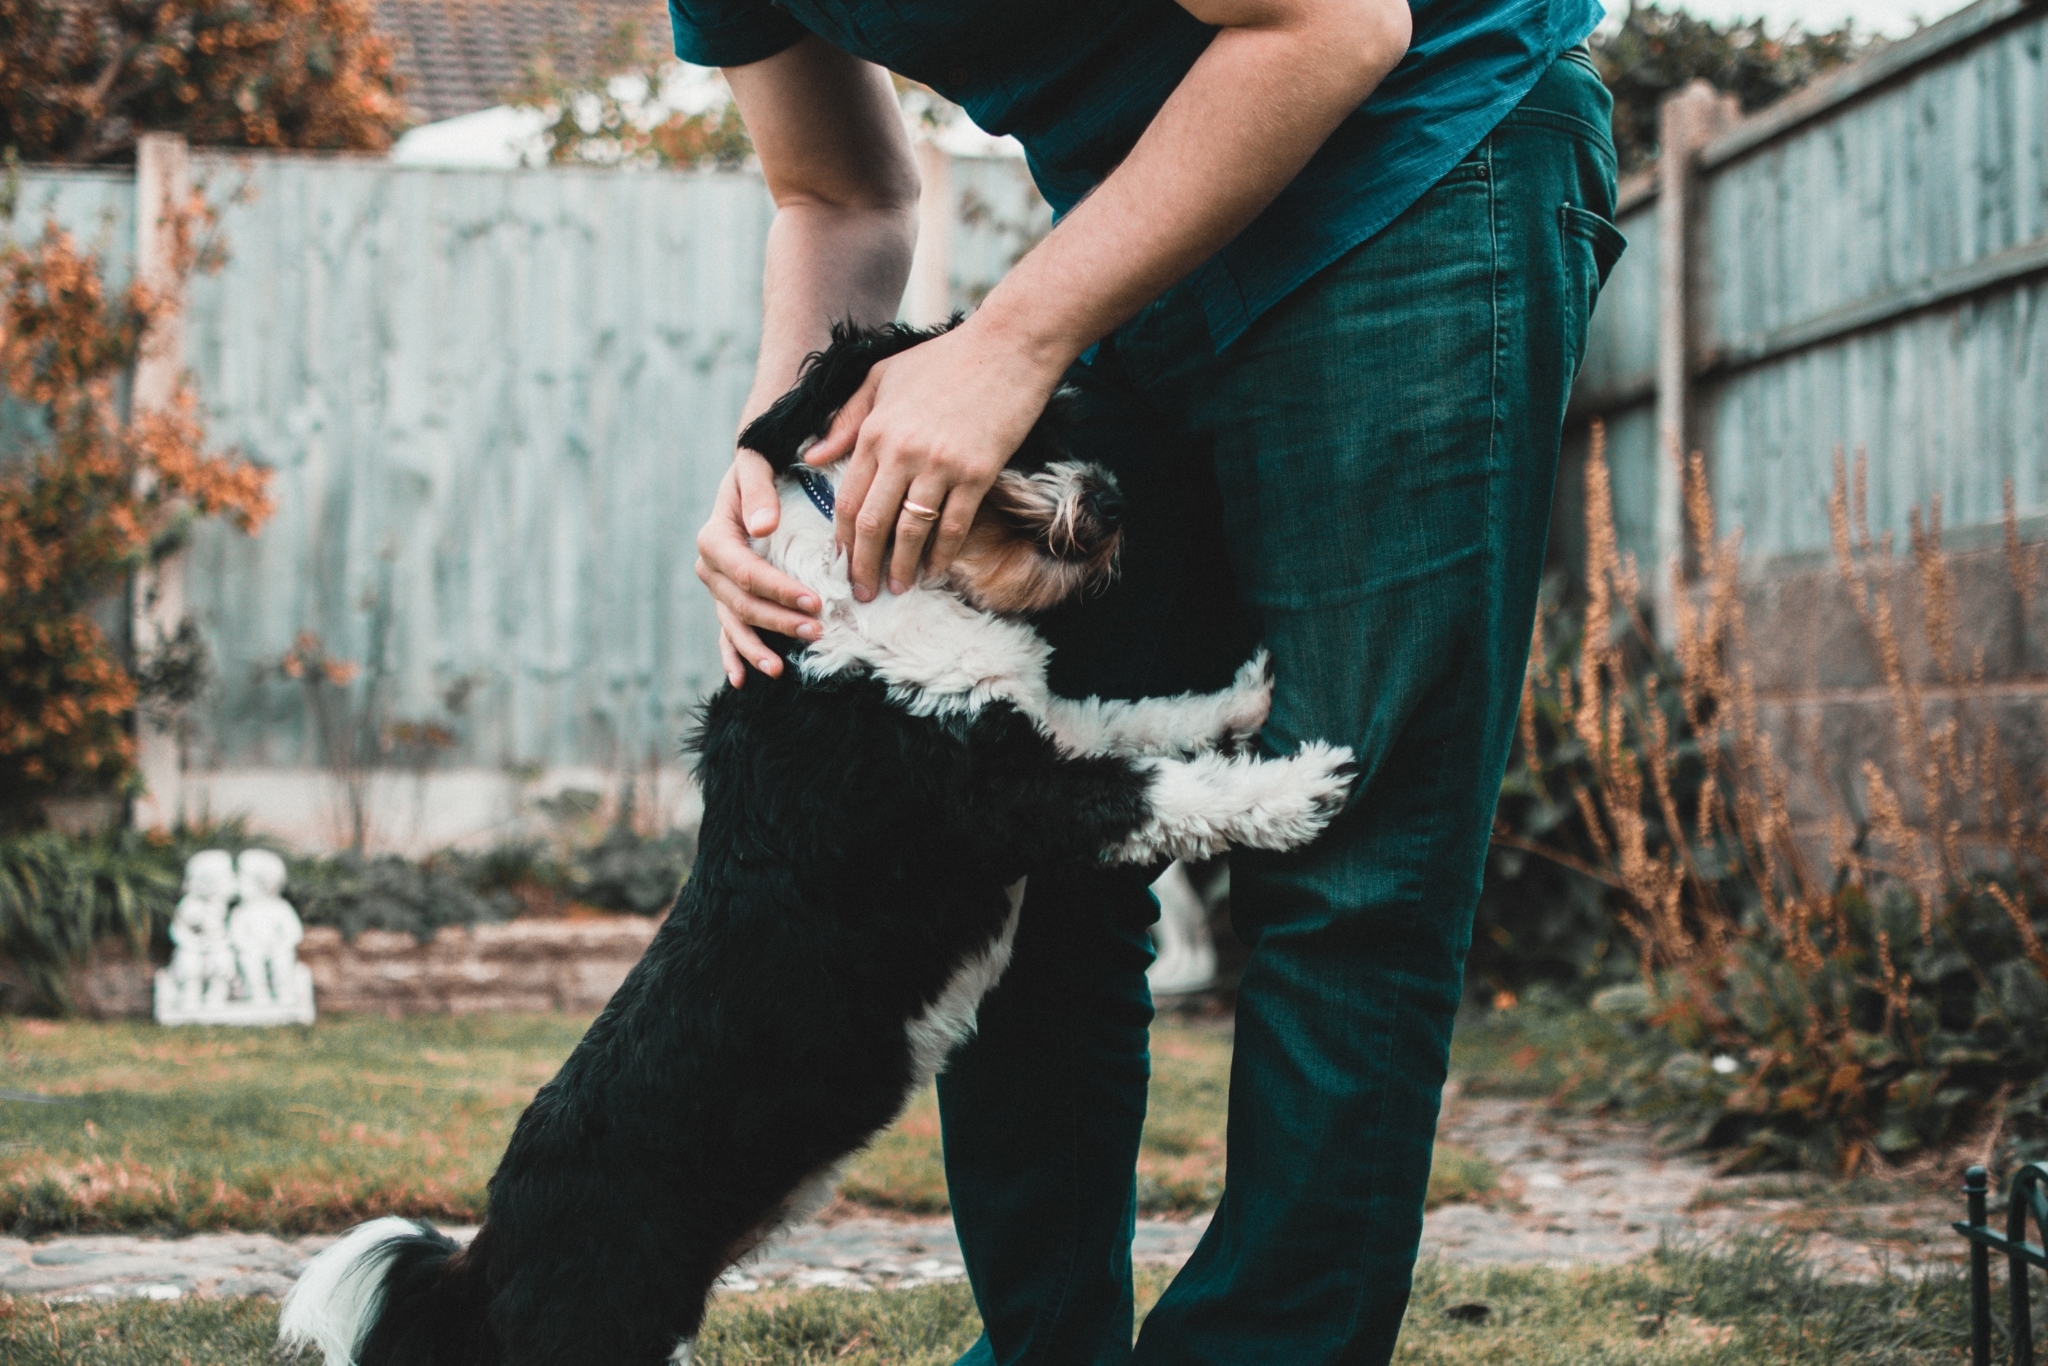 A black and white dog jumping up on a mans legs and the man petting the dog's head with both hands